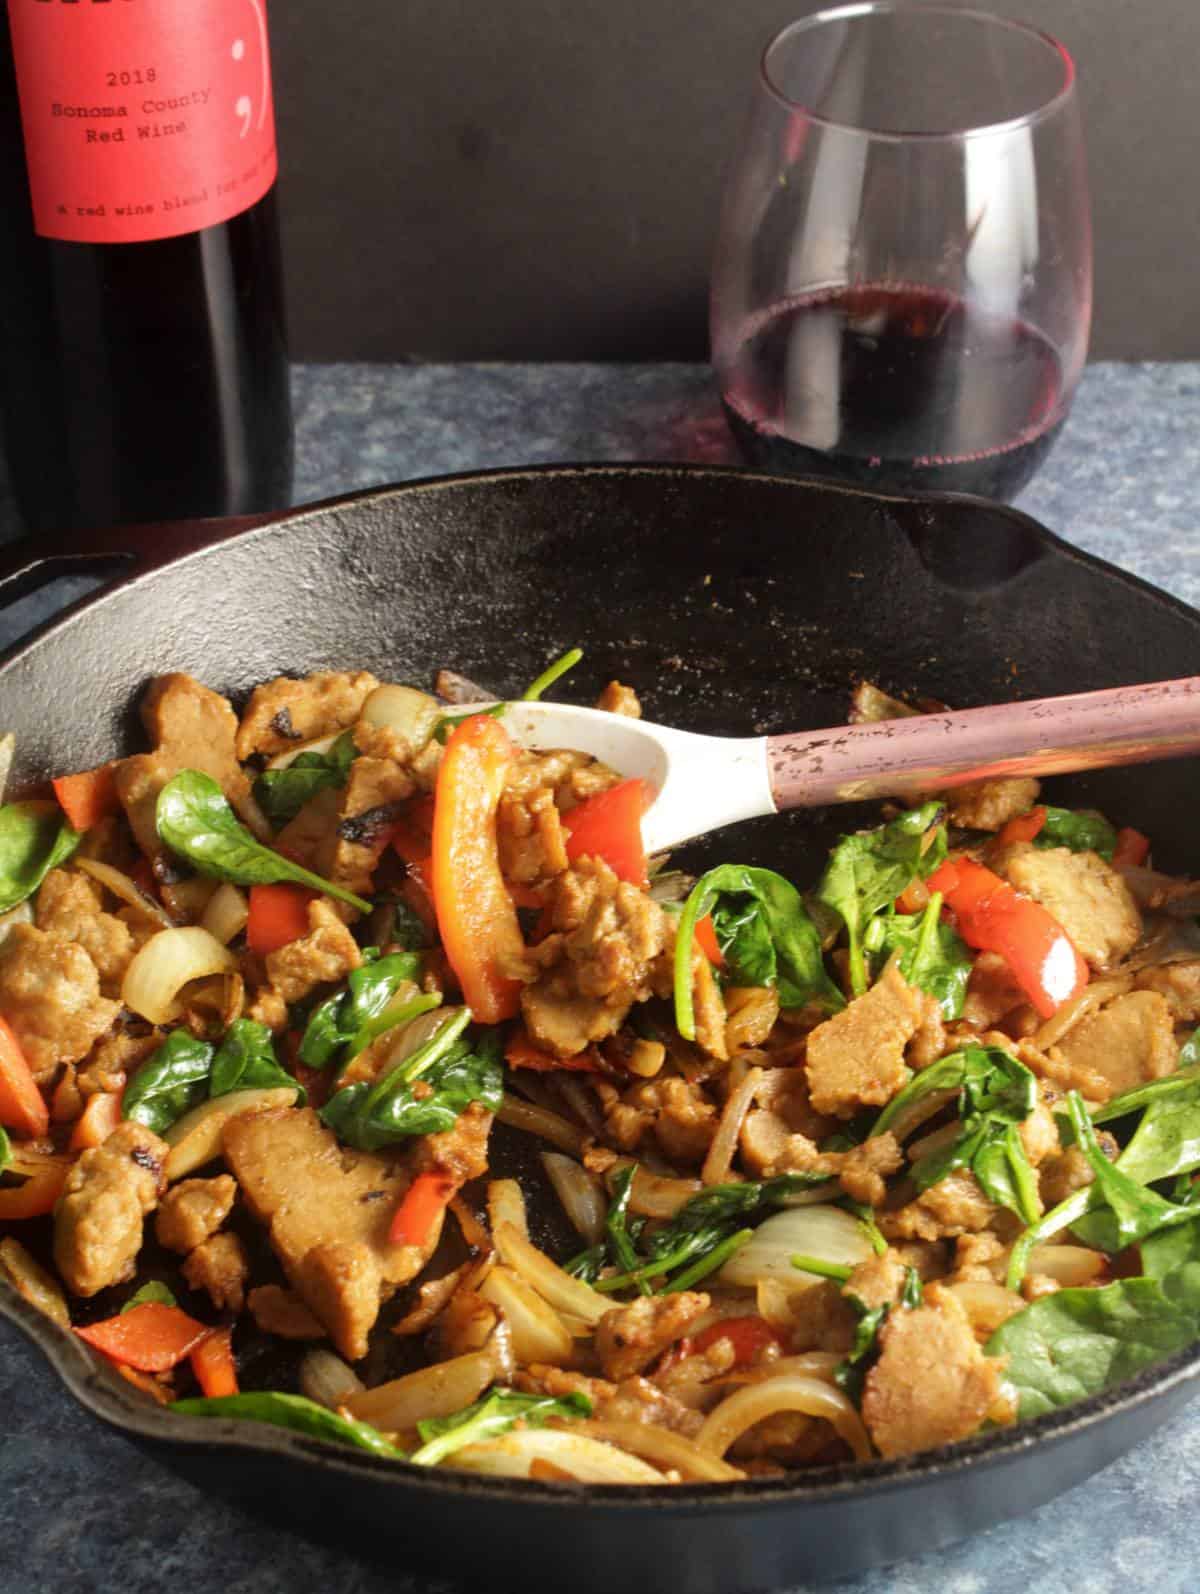 seitan skillet with a red wine.